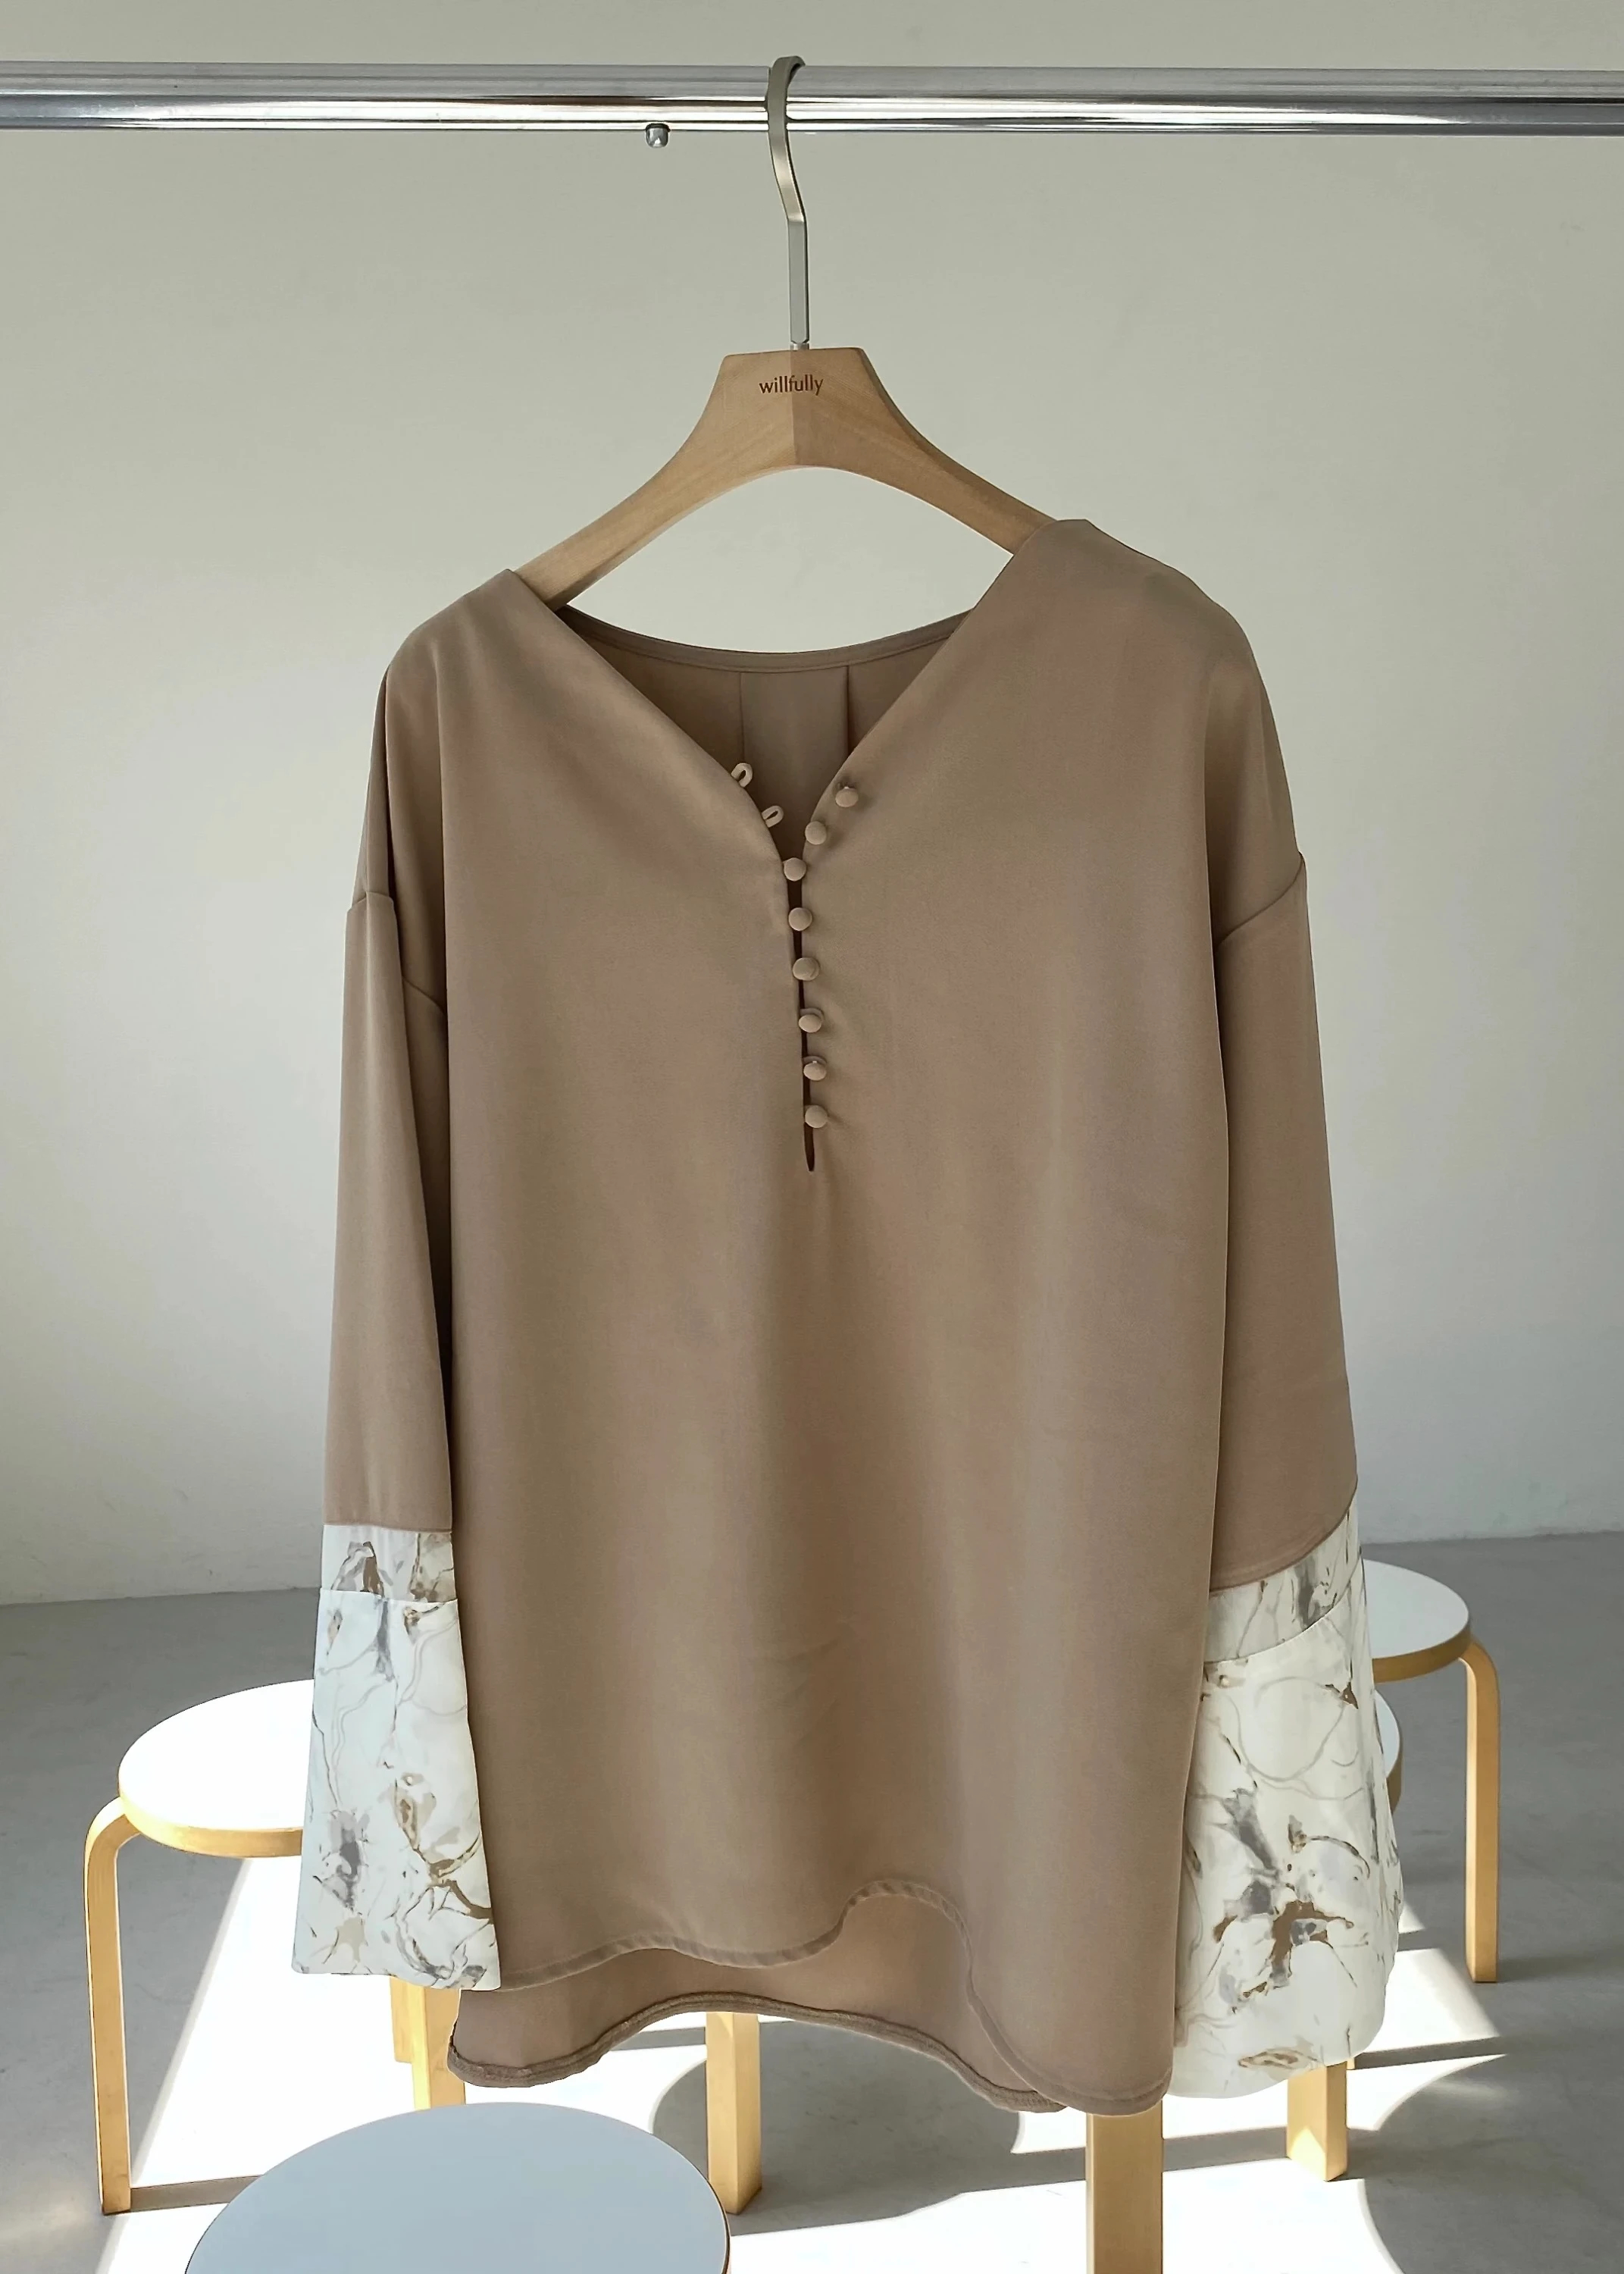 willfully embroidery chiffon sheer BL